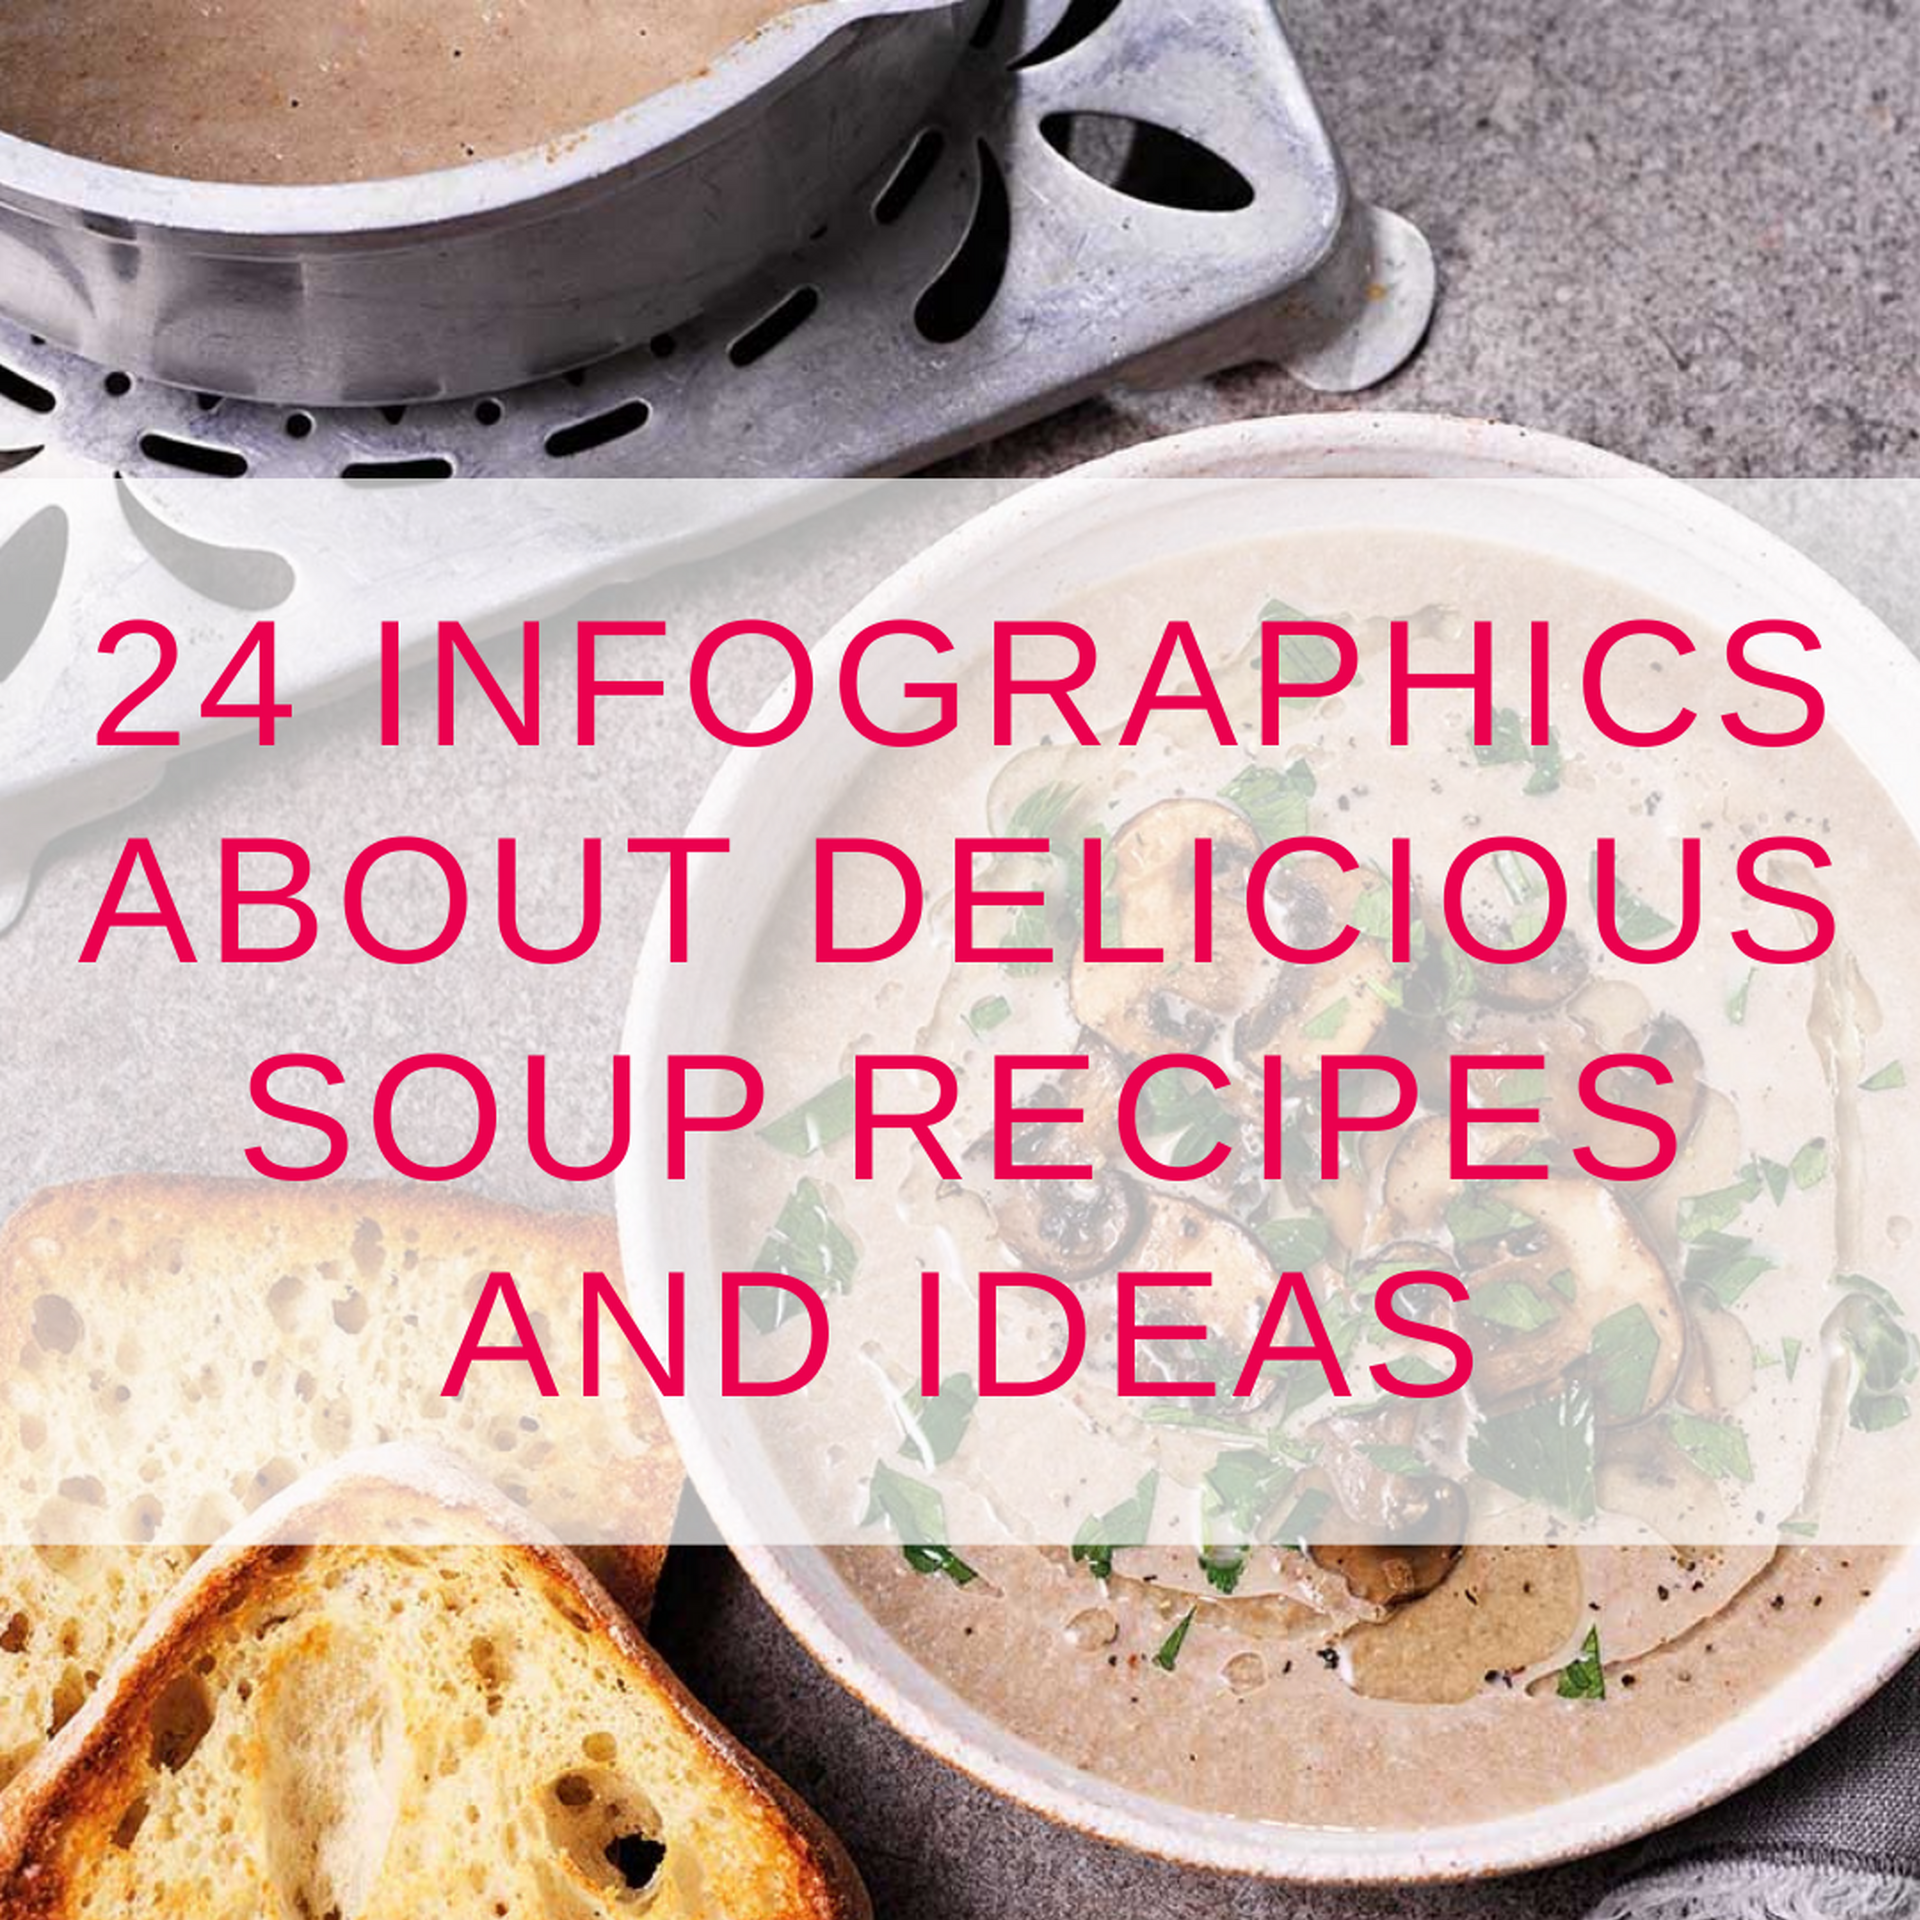 24 Infographics About Delicious Soup Recipes and Ideas